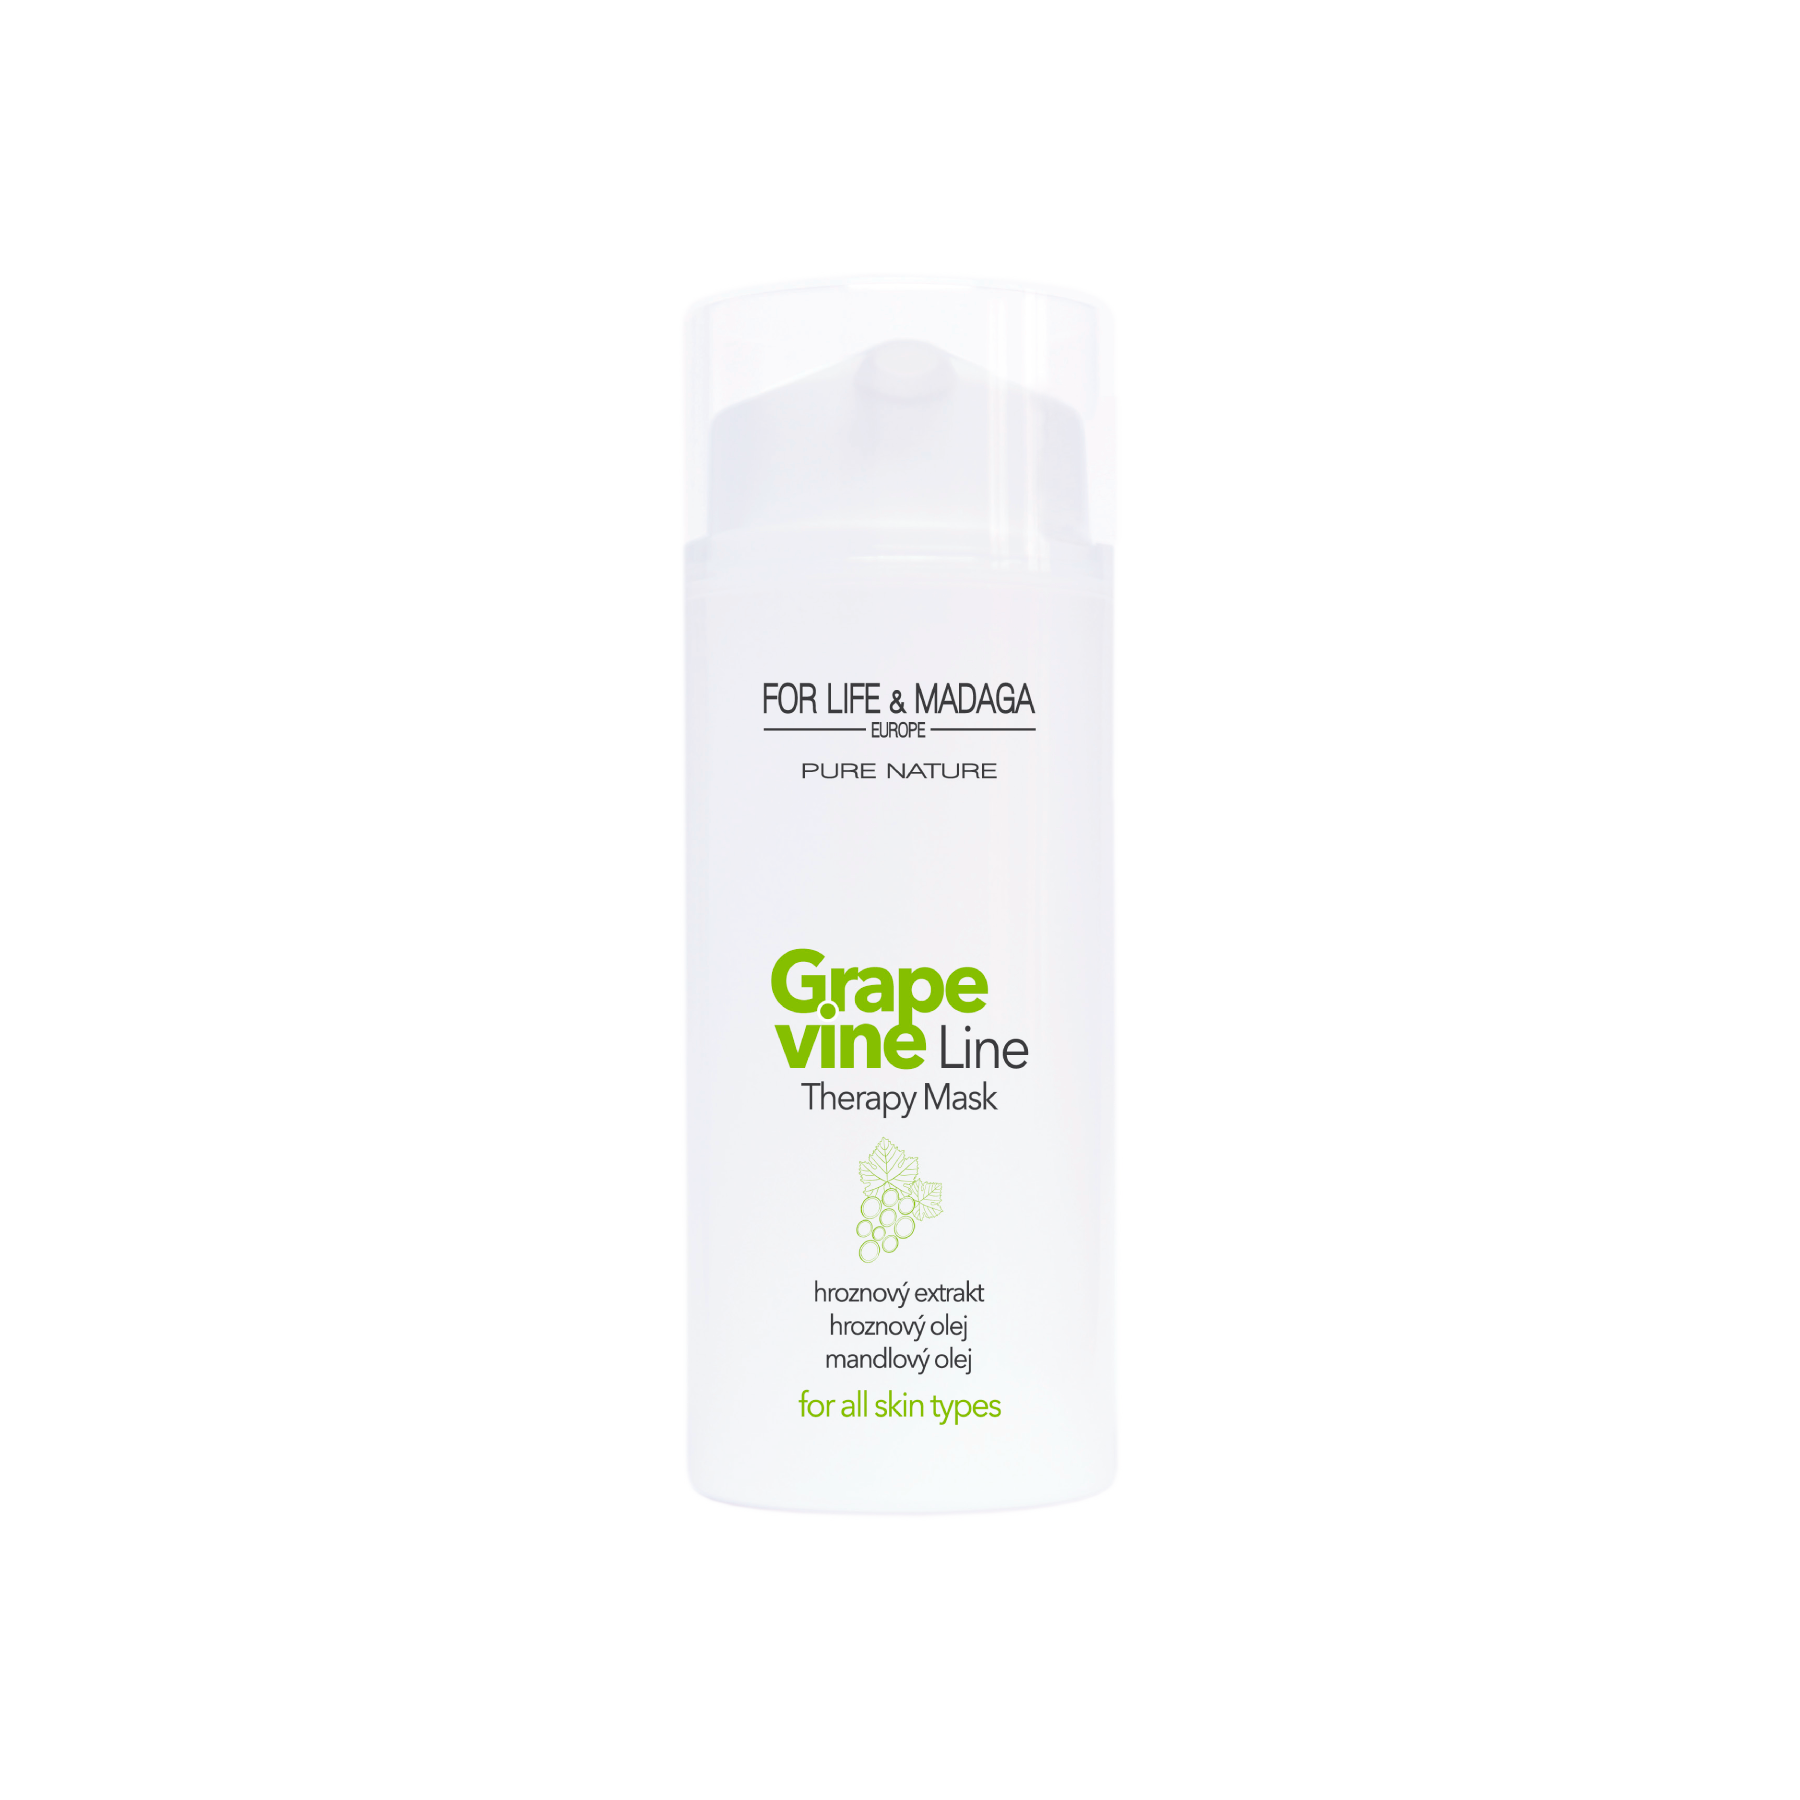 Image of GRAPEVINE LINE THERAPY MASK 100 ml